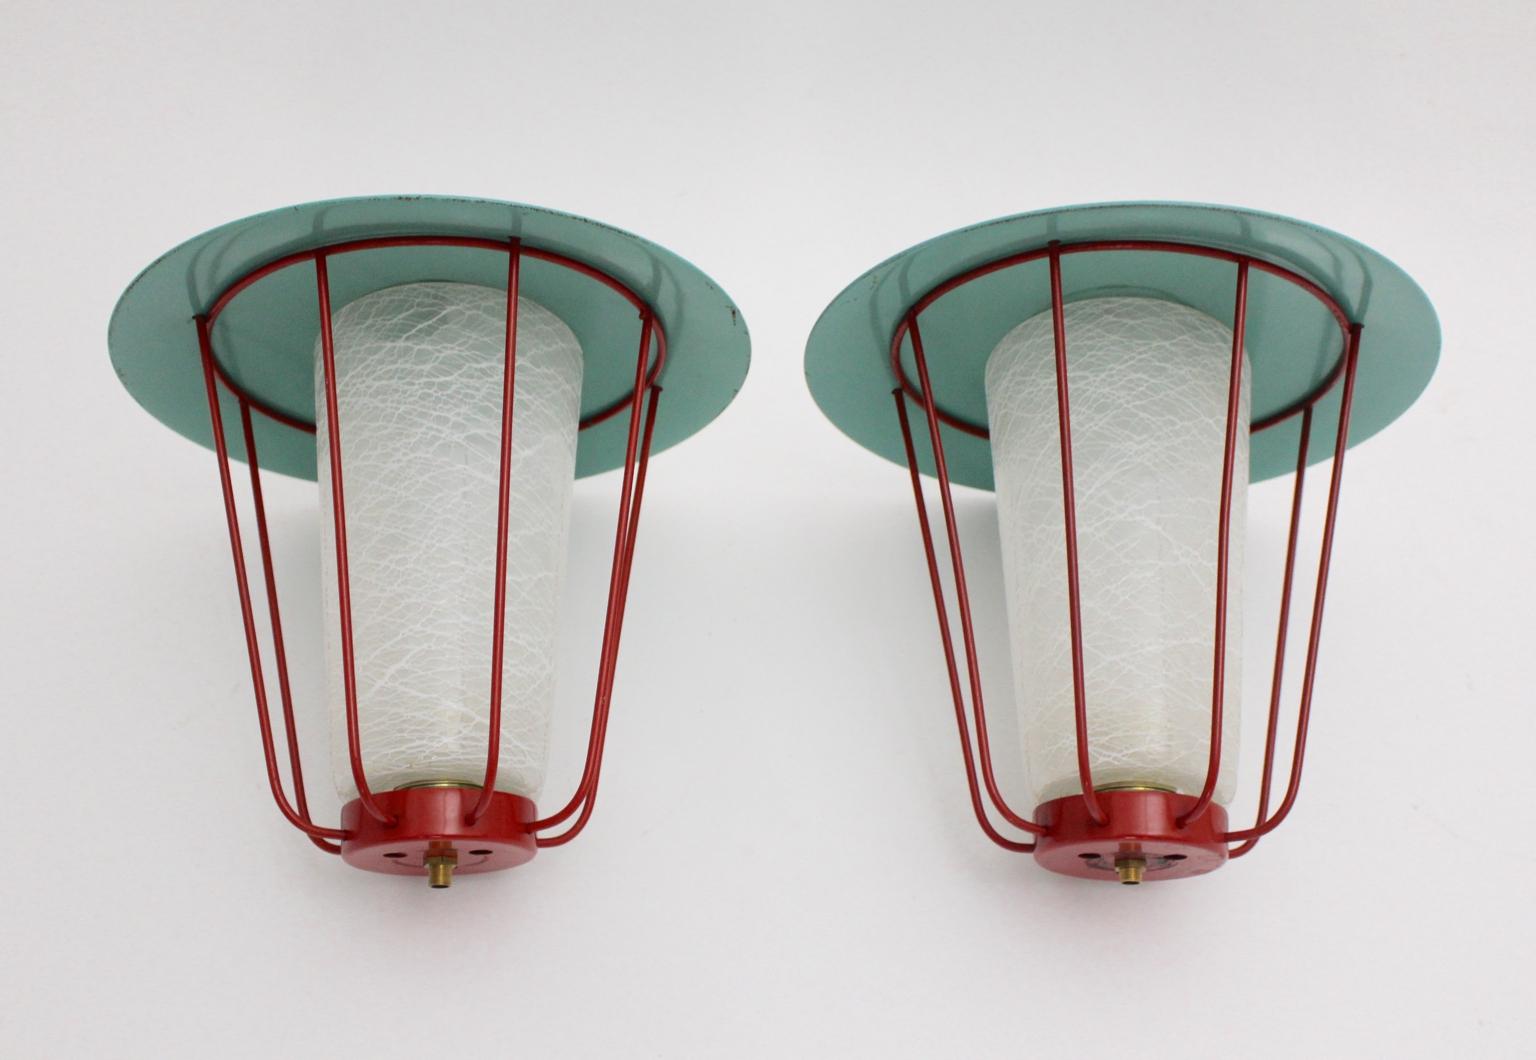 This pair of metal lanterns was designed and made in Vienna circa 1960 by J.T.Kalmar.
In the midcentury period the lighting firm Kalmar manufactured and designed the most innovative light designs and was one of the most important lighting